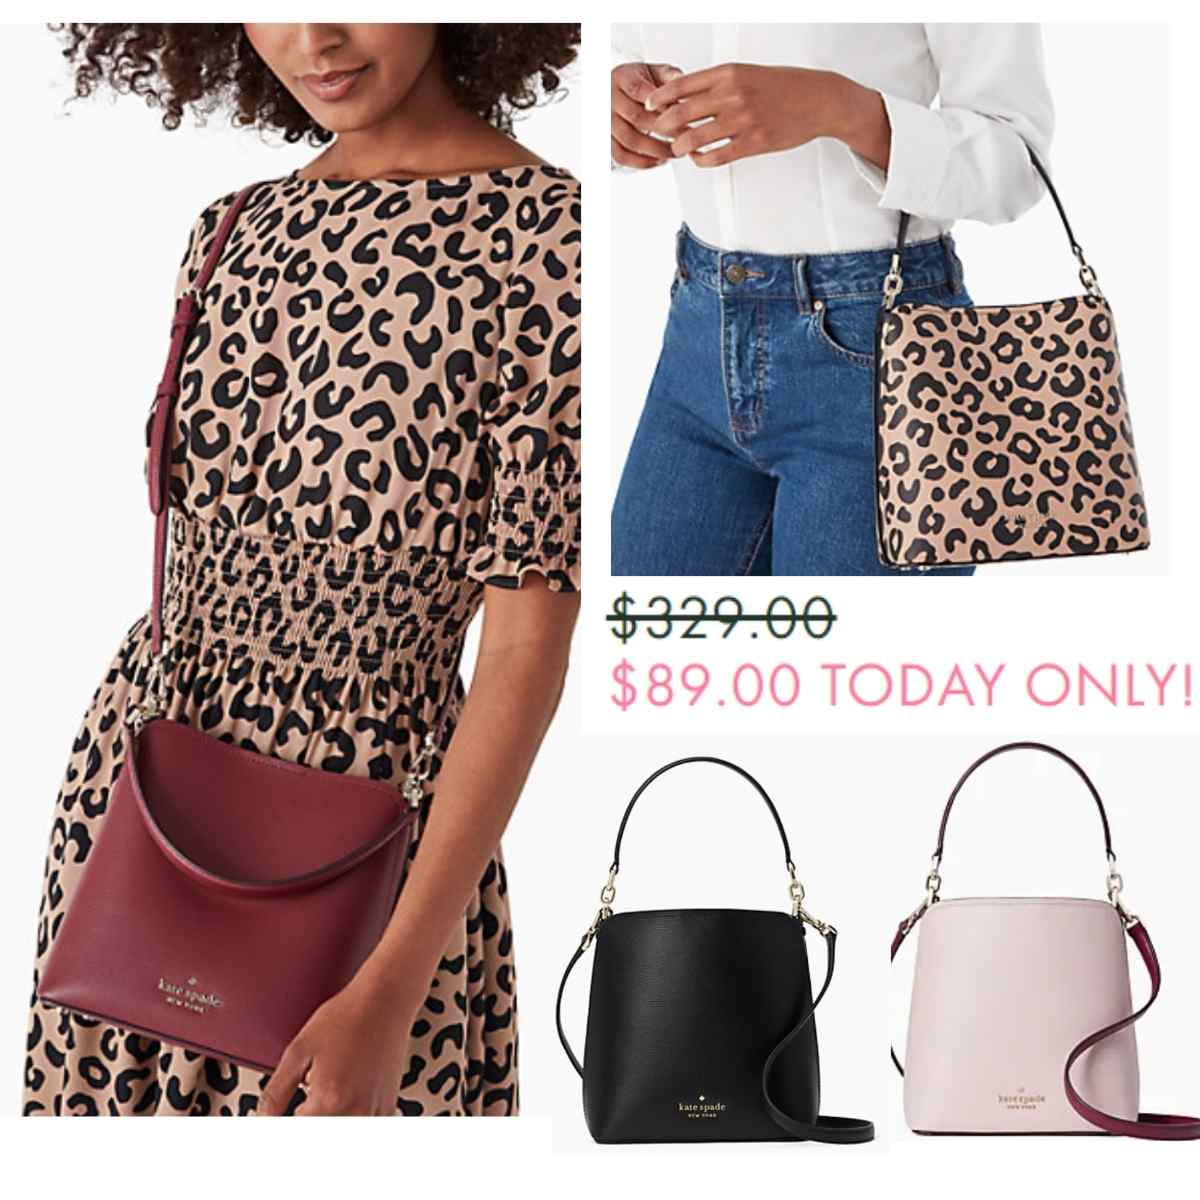 Kate Spade Darcy bucket tote for $89 (Reg. $329) | Smart Savers